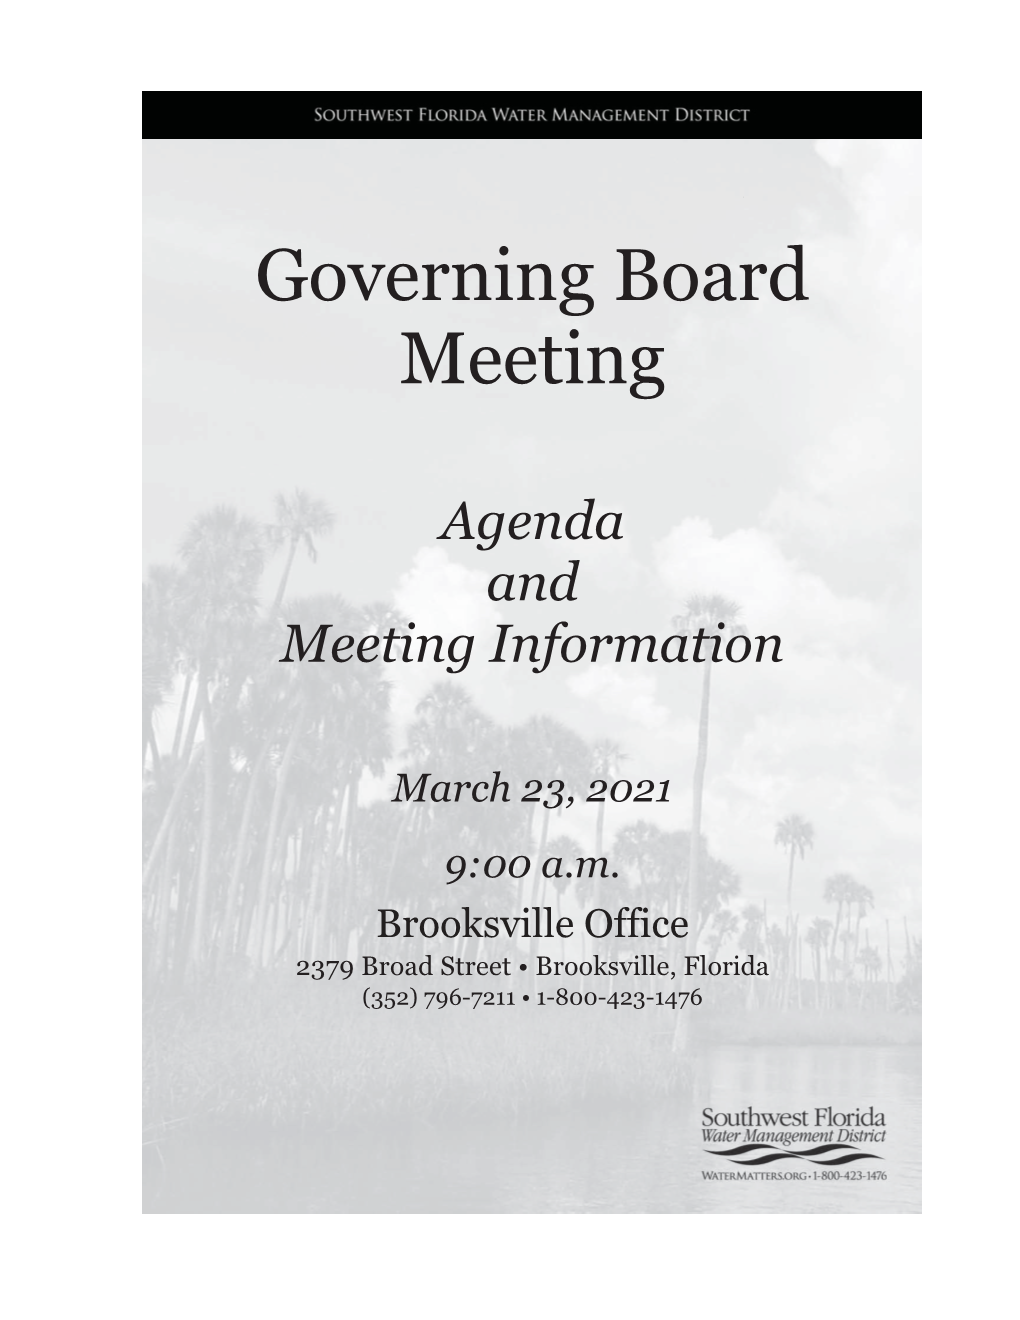 Governing Board Meeting Agenda and Meeting Information